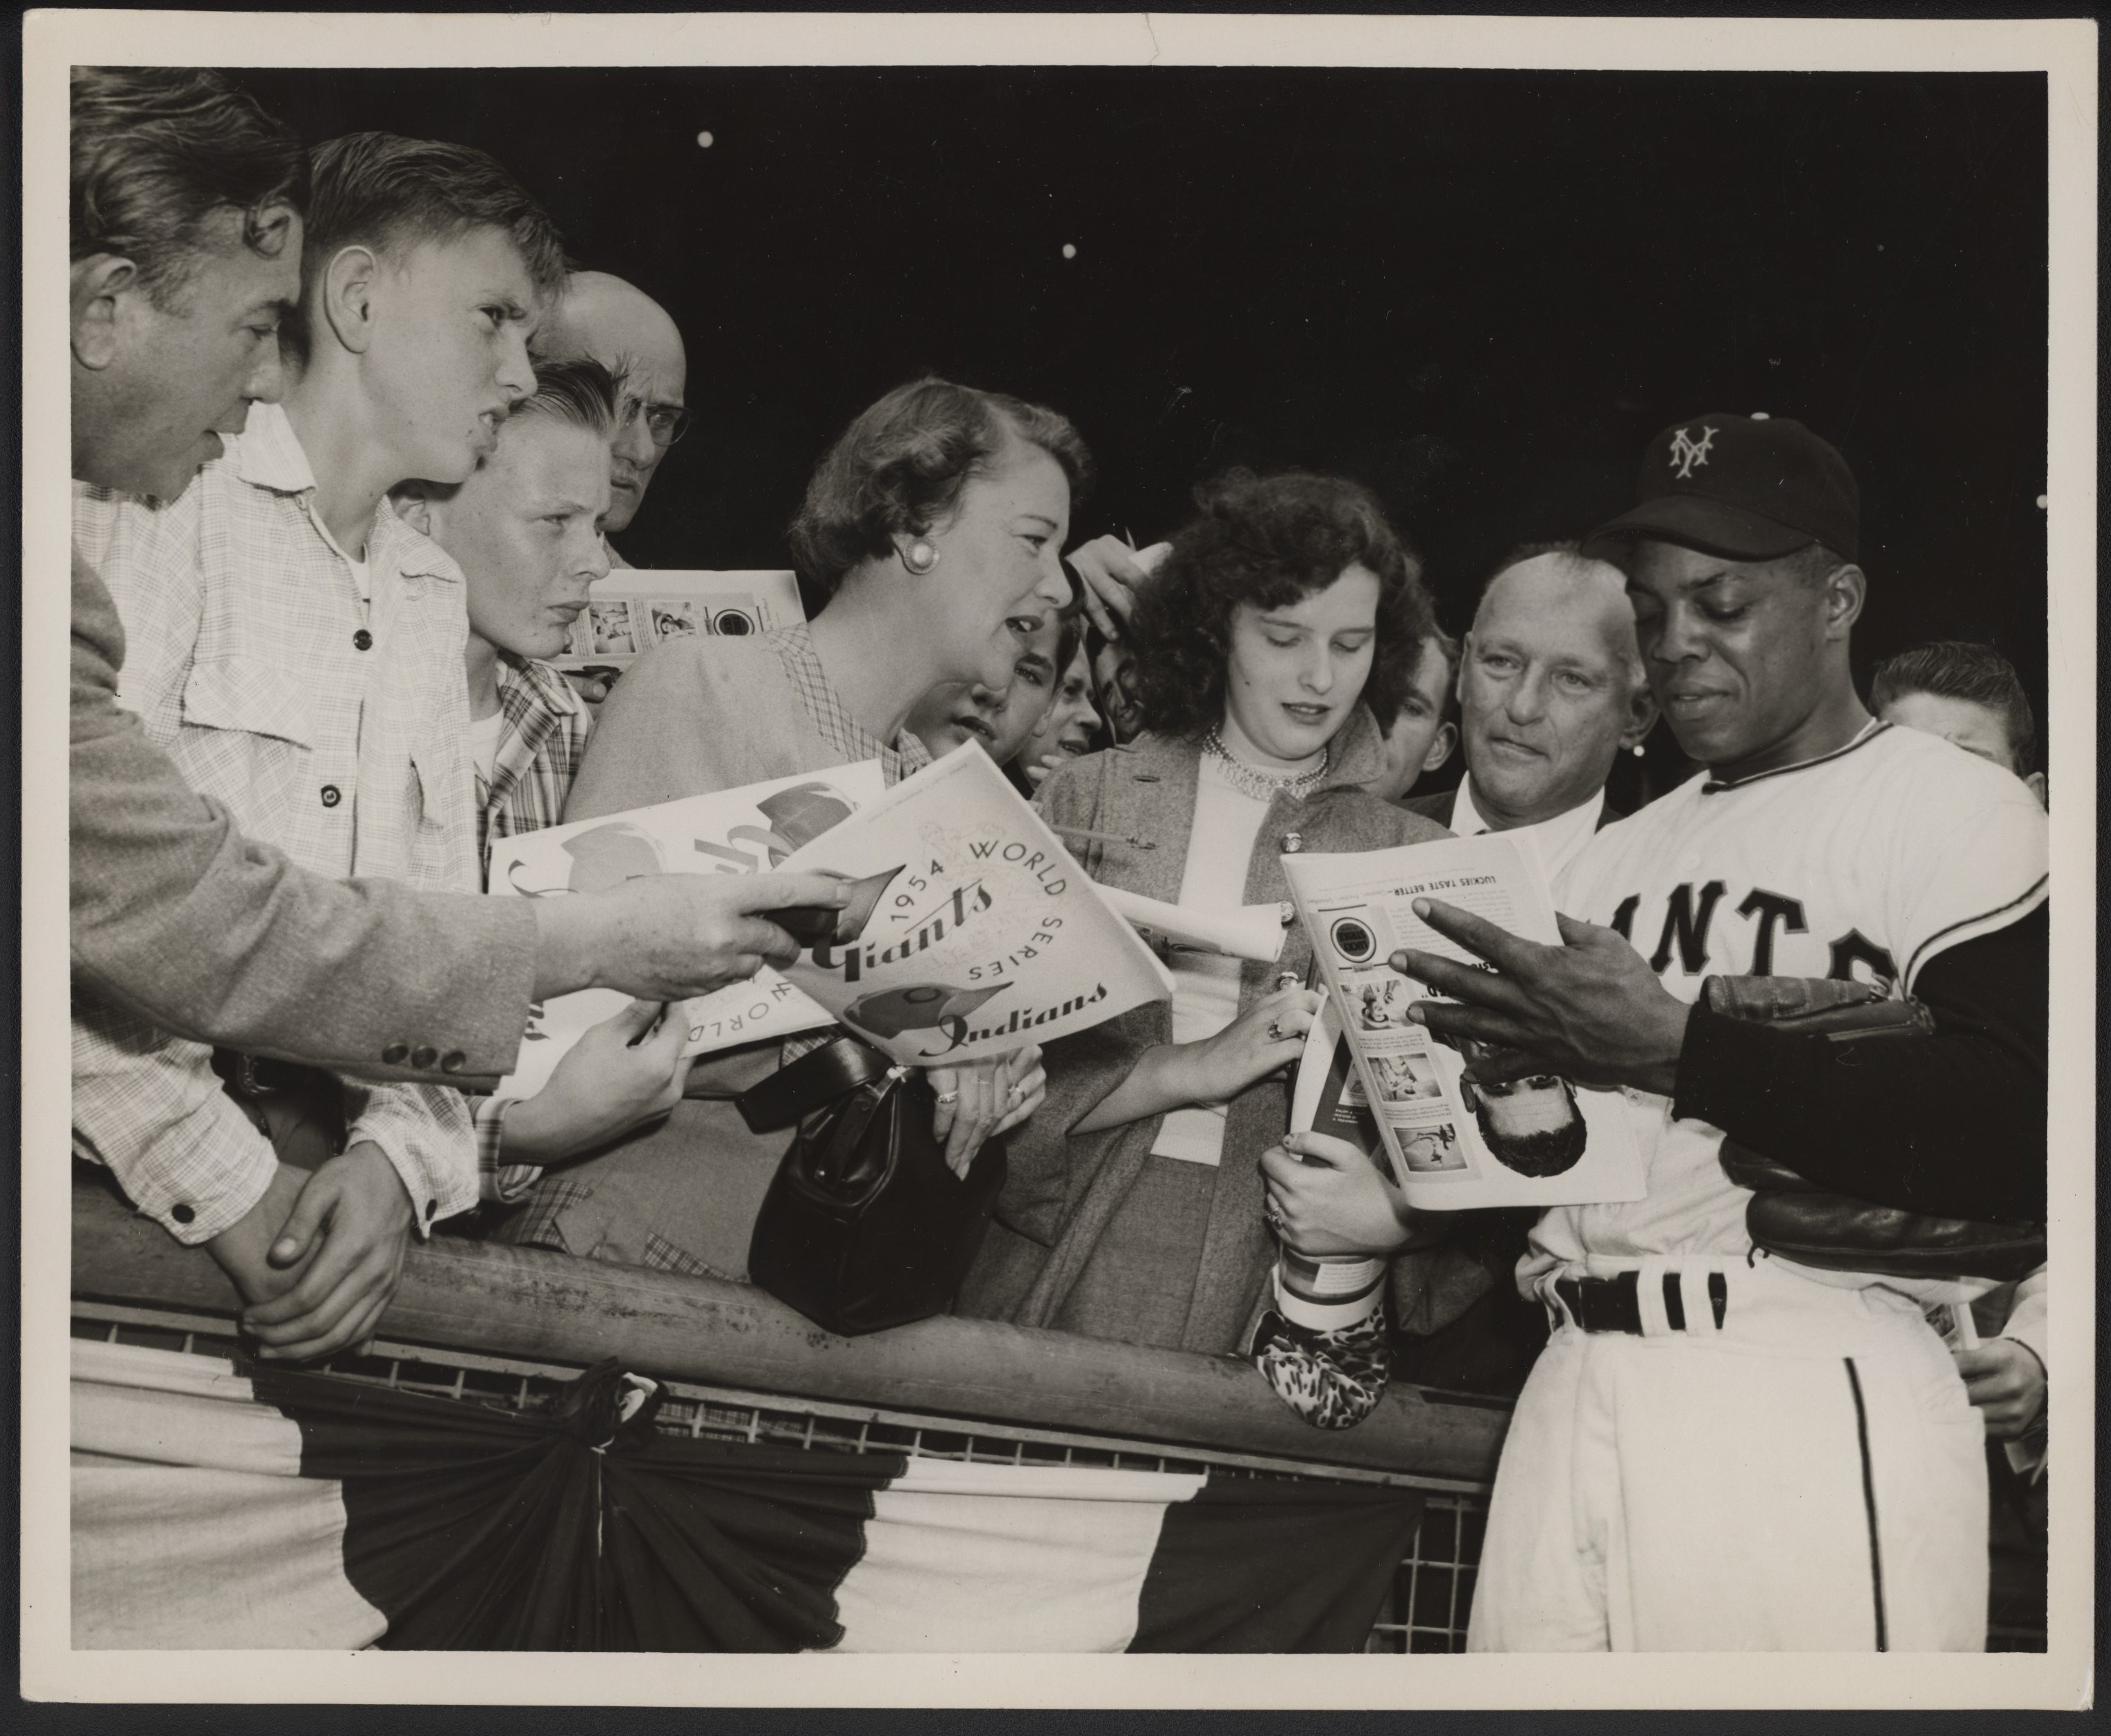 1954 Willie Mays Signs Autographs at World Series Type I Press Photo